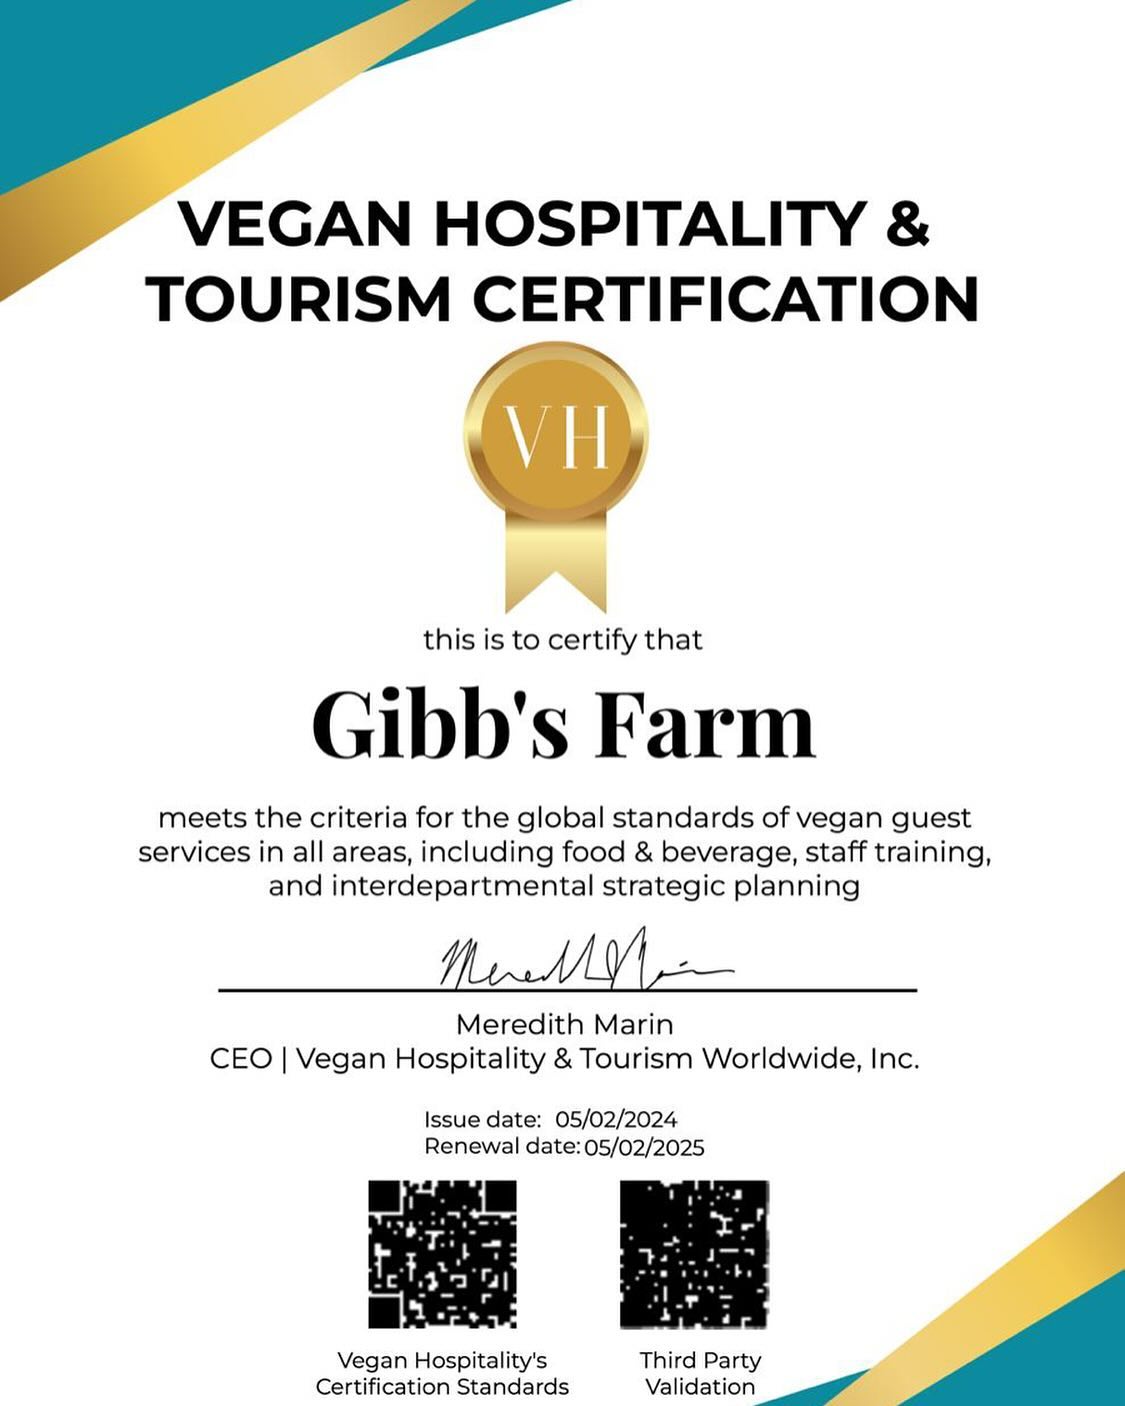 We are very pleased to have been certified by Vegan Hospitality as a Vegan Friendly place to dine and stay.  In addition to traditional dishes our menu includes vegan options created from produce harvested daily fresh from our organic farm. #vegan #veganhospitality #veganfriendly #healthy #wellness